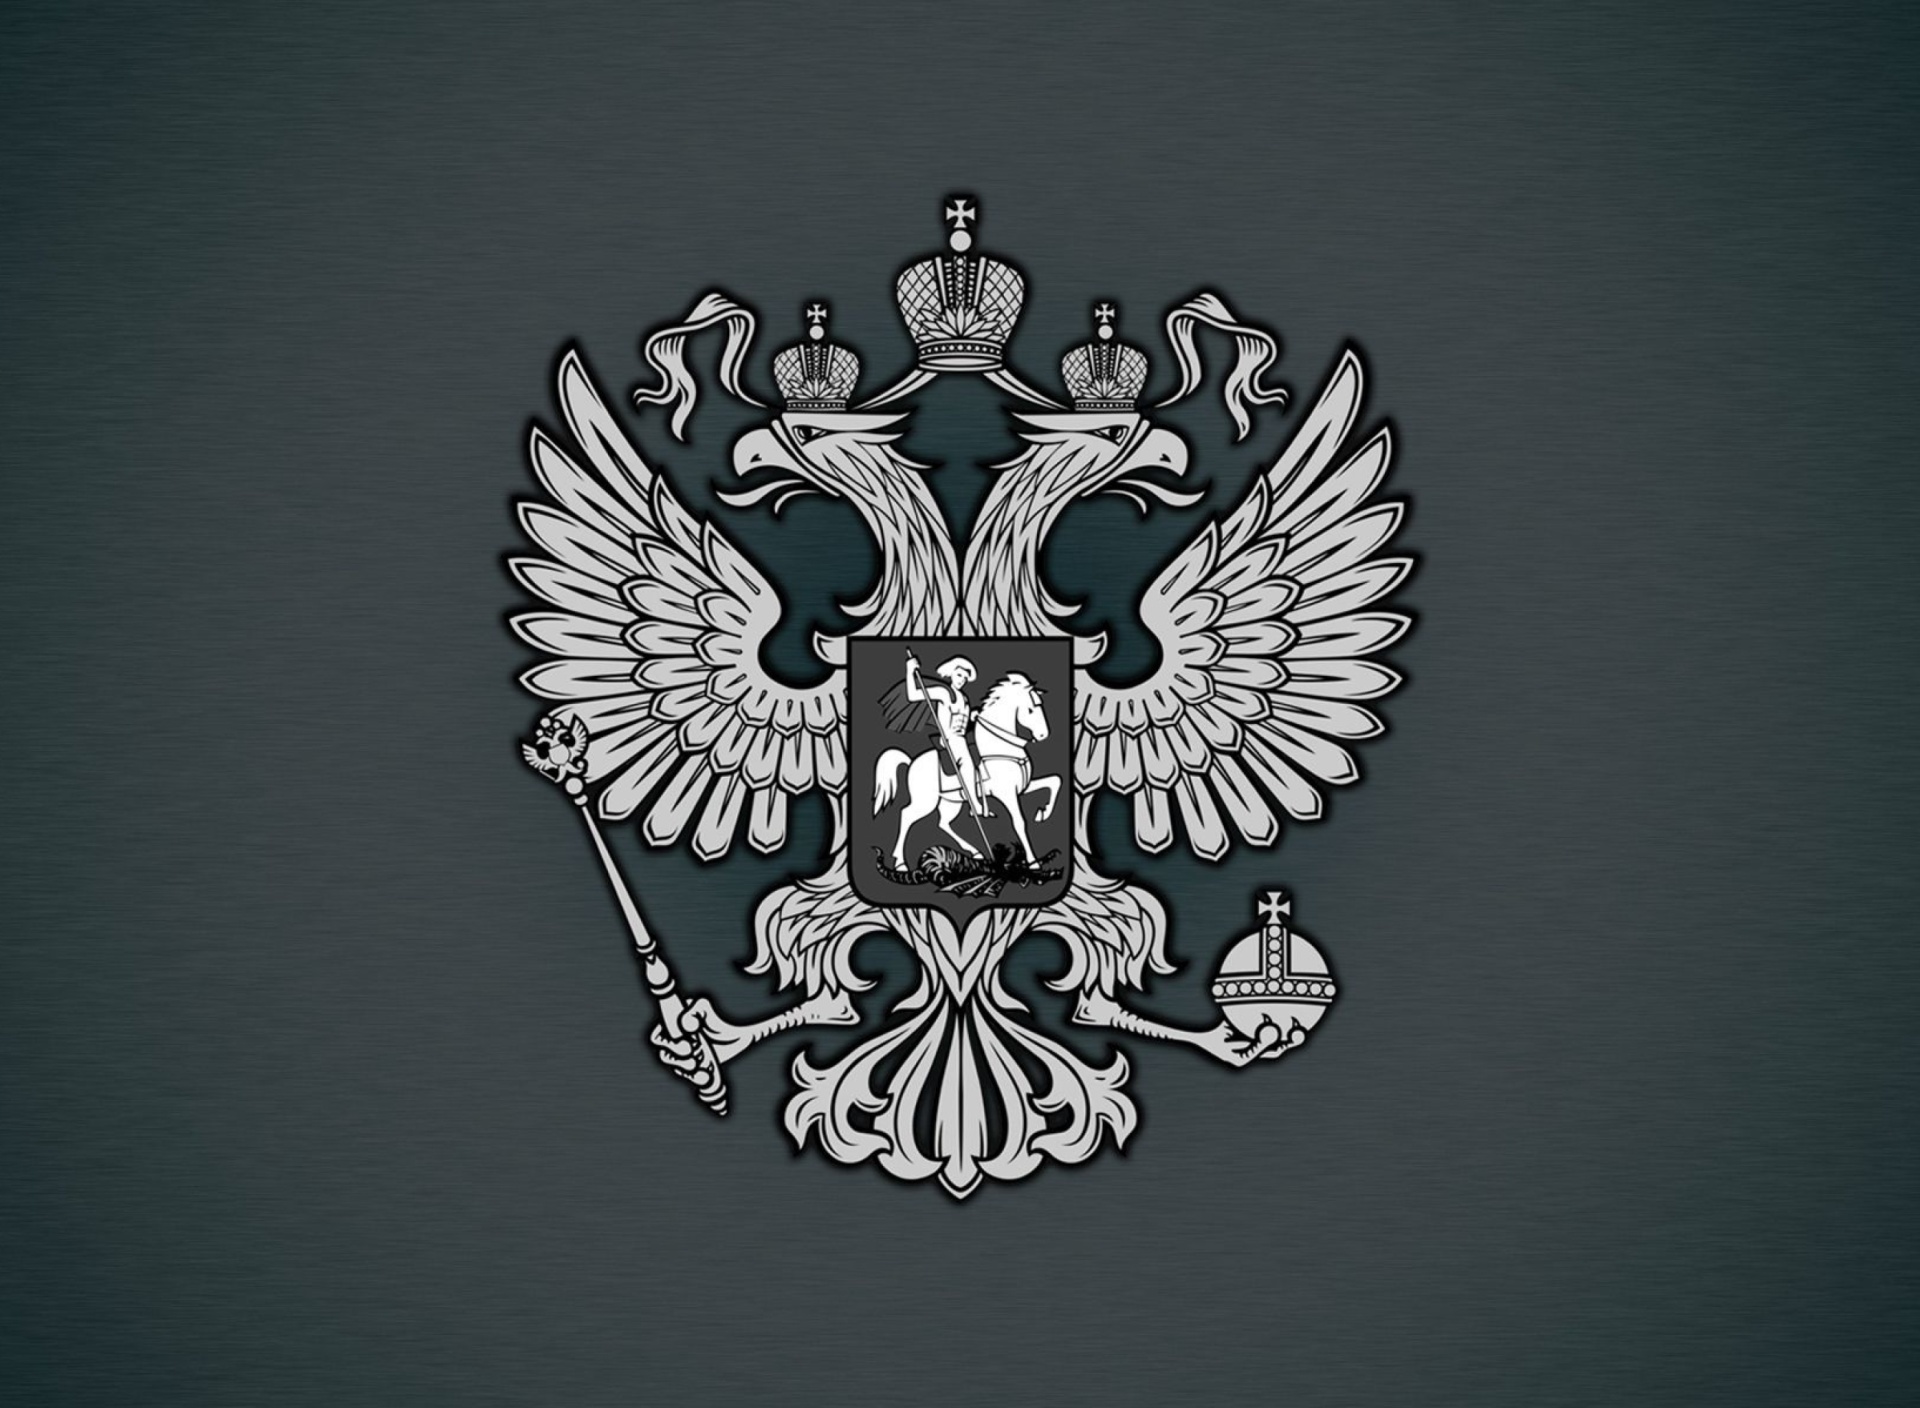 Das Coat of arms of Russia Wallpaper 1920x1408